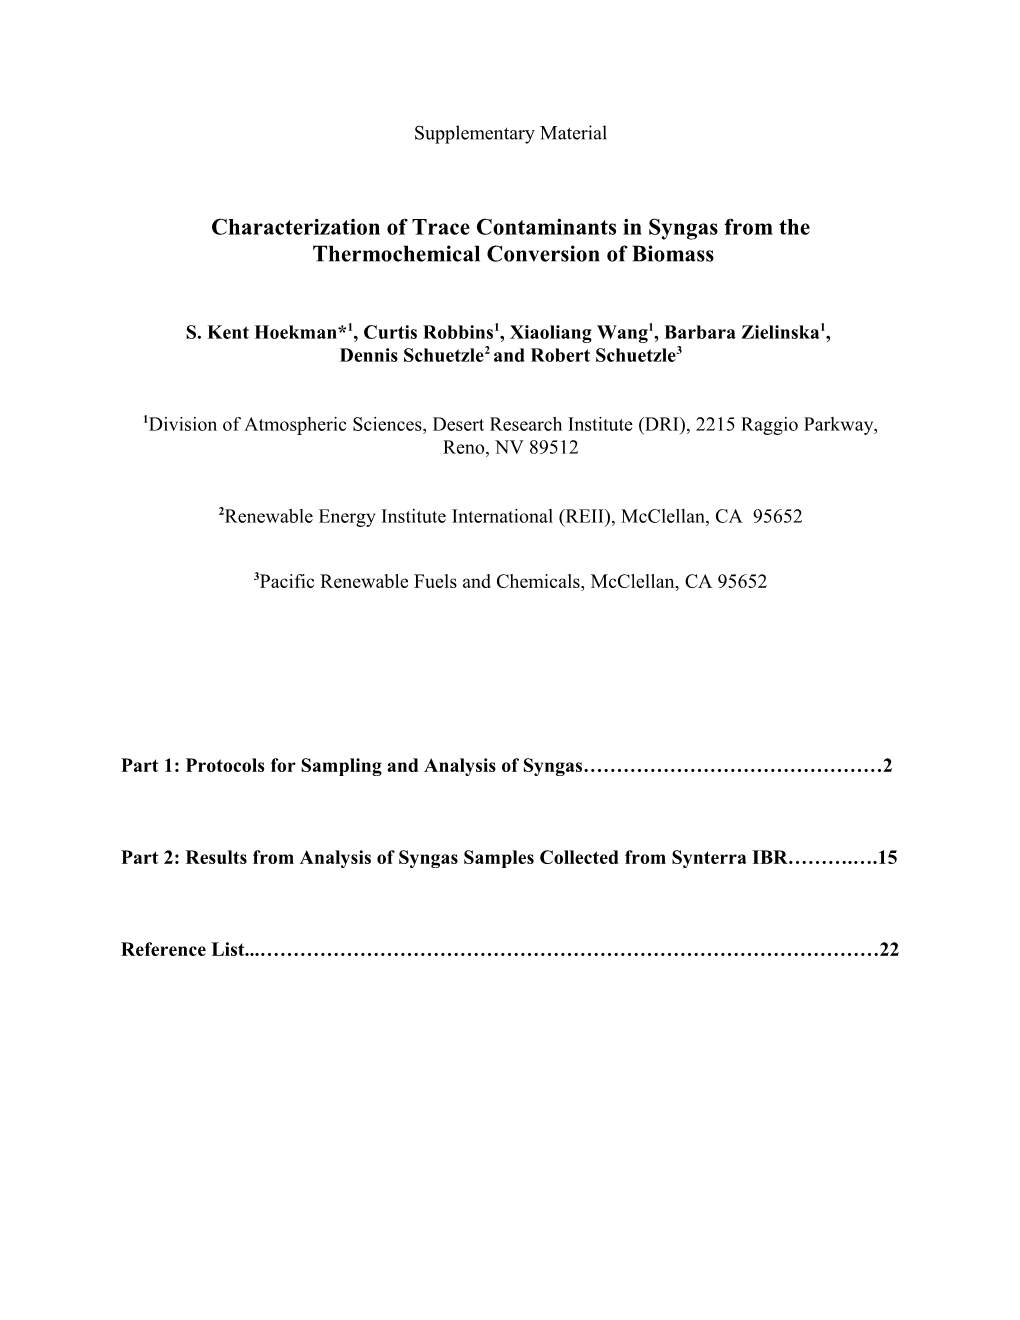 Characterization of Trace Contaminants in Syngas from The